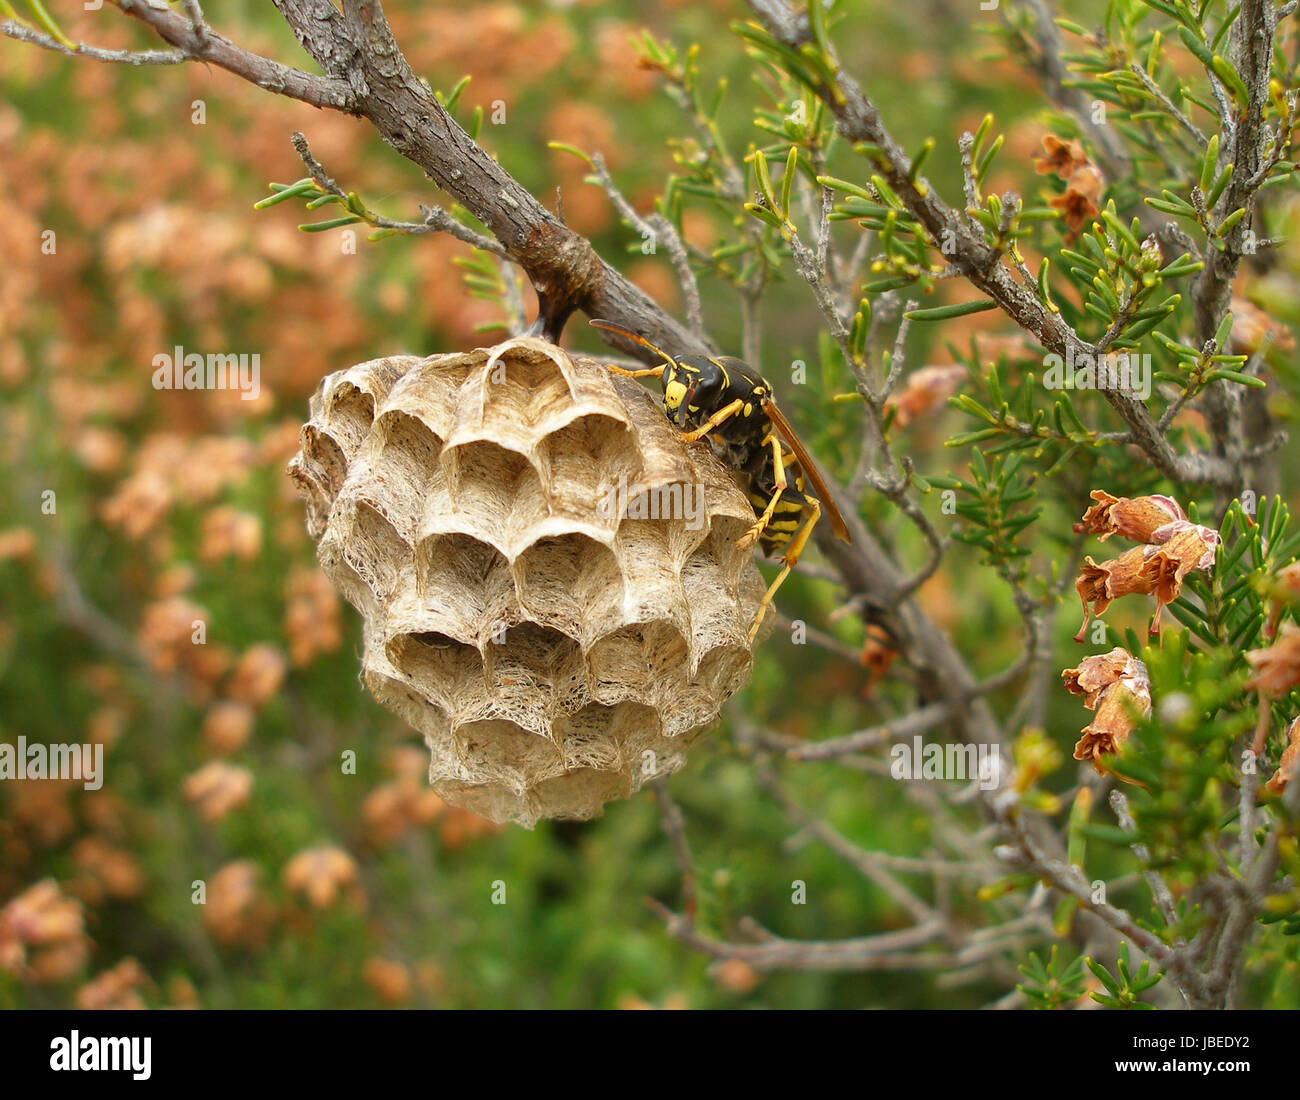 Wasp nest in an Atlantic forest Stock Photo